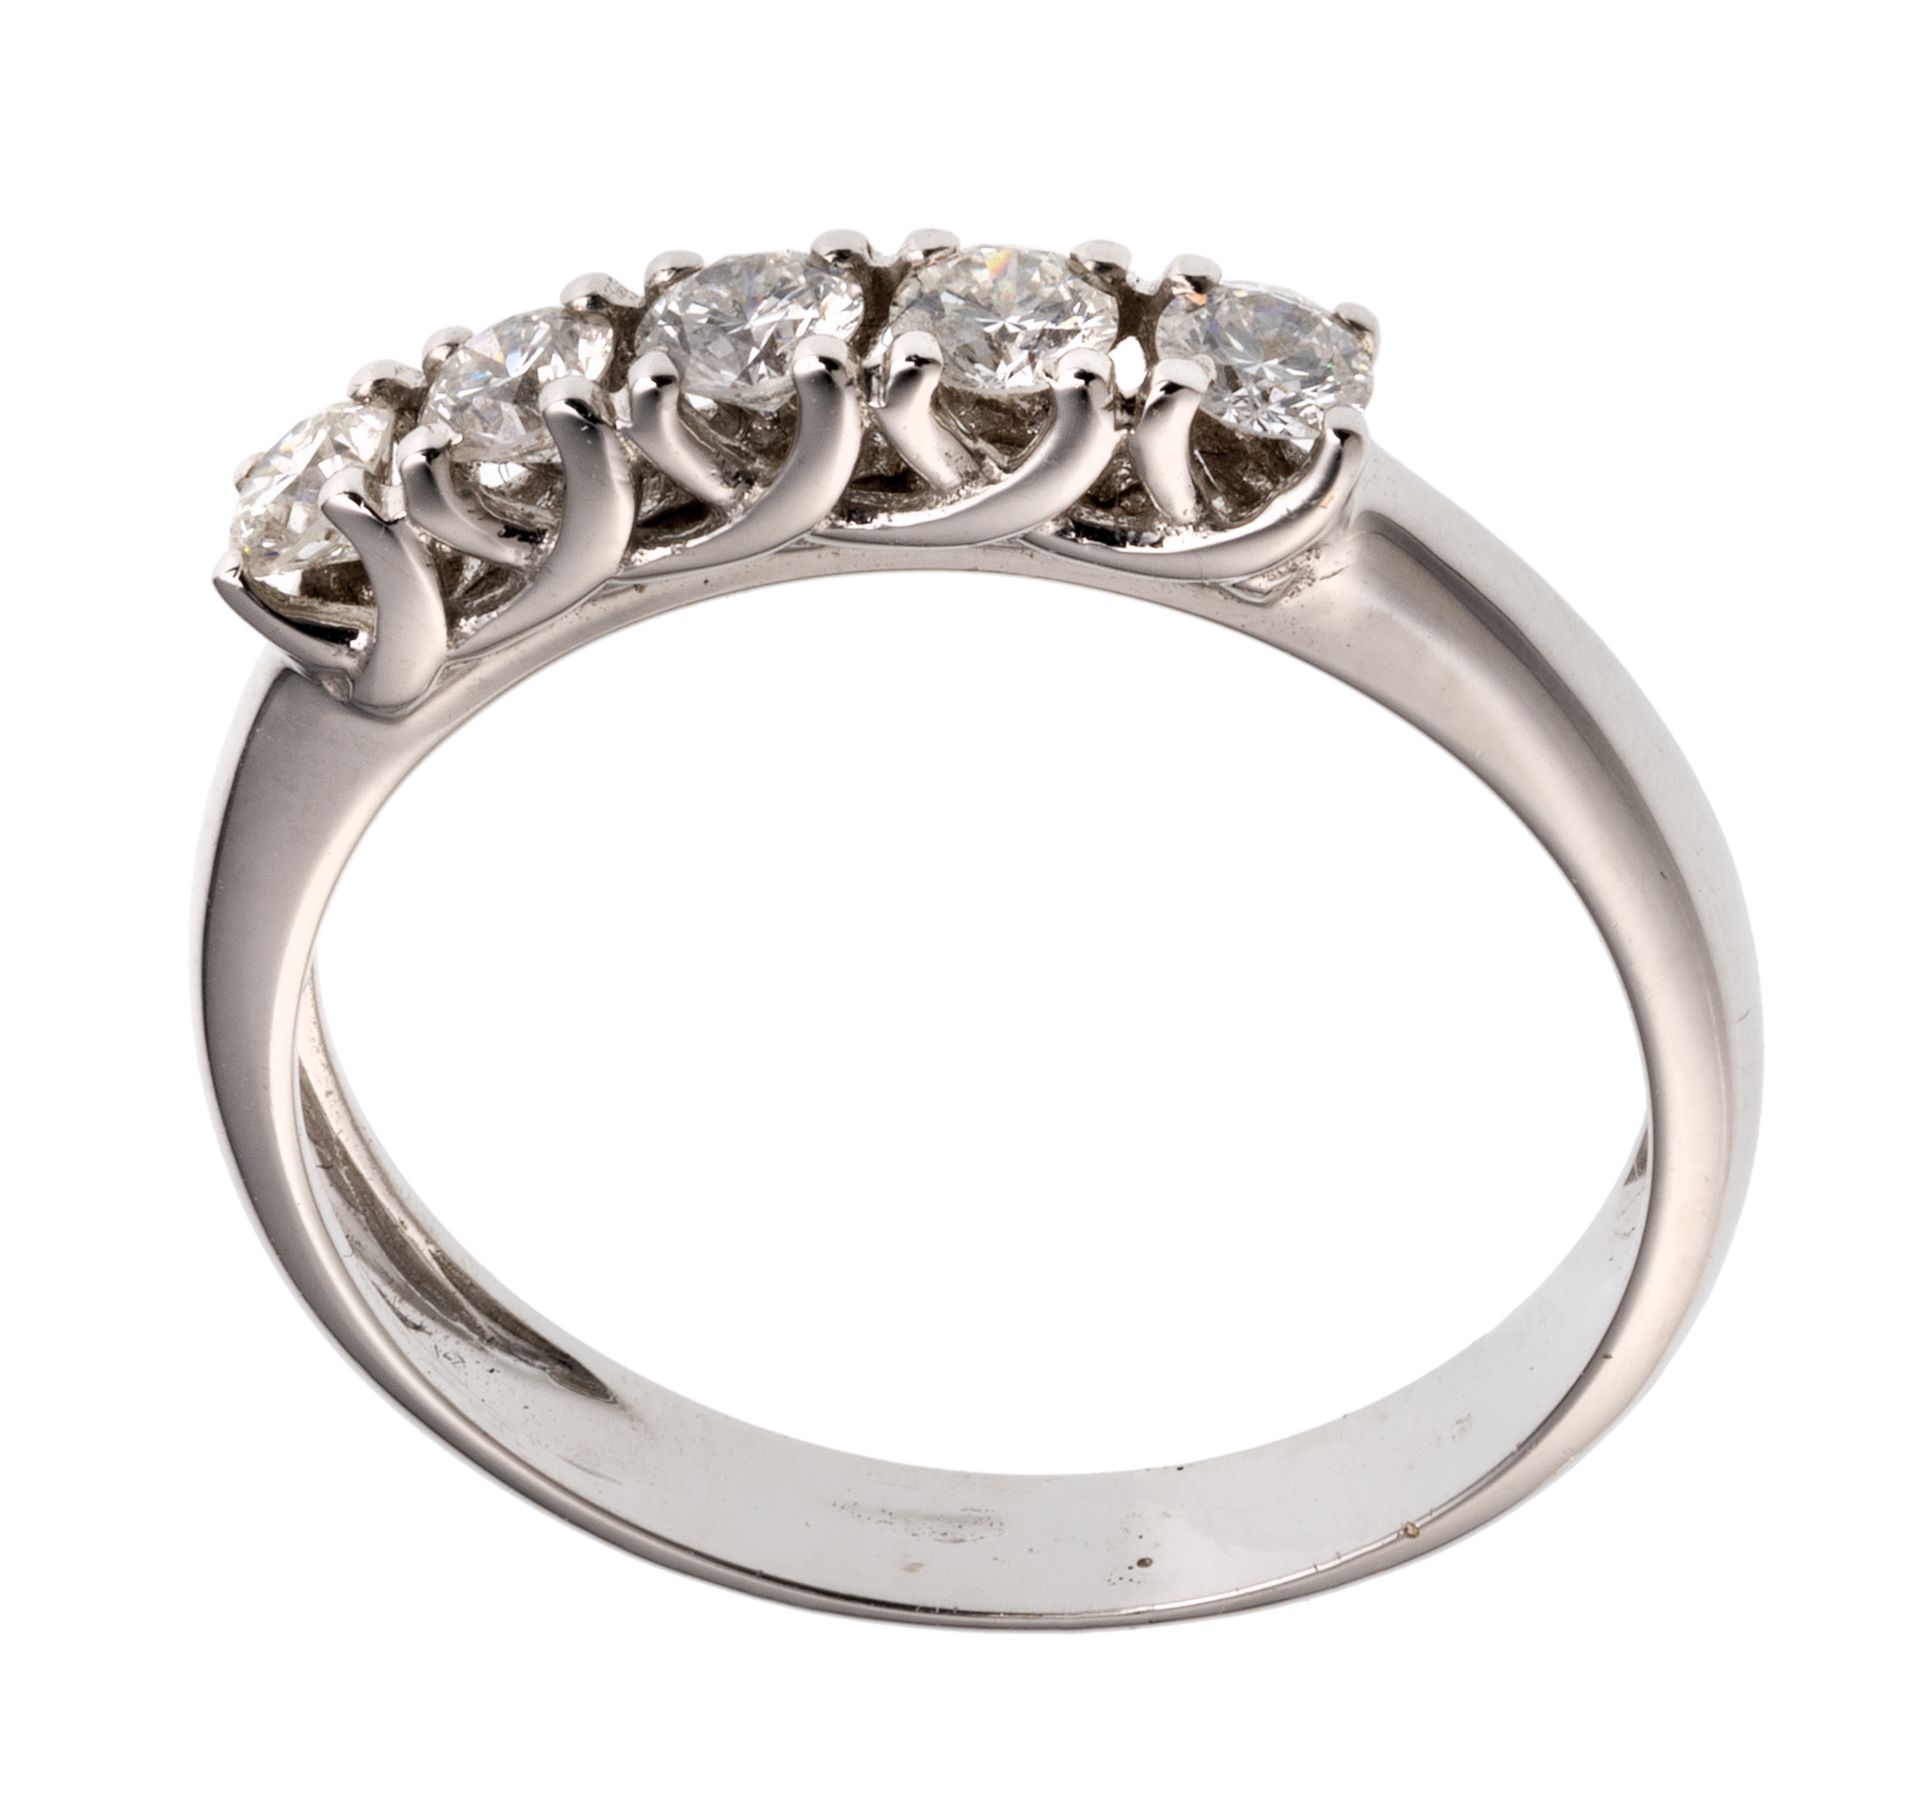 WHITE GOLD RIVIERE RING WITH FIVE DIAMONDS